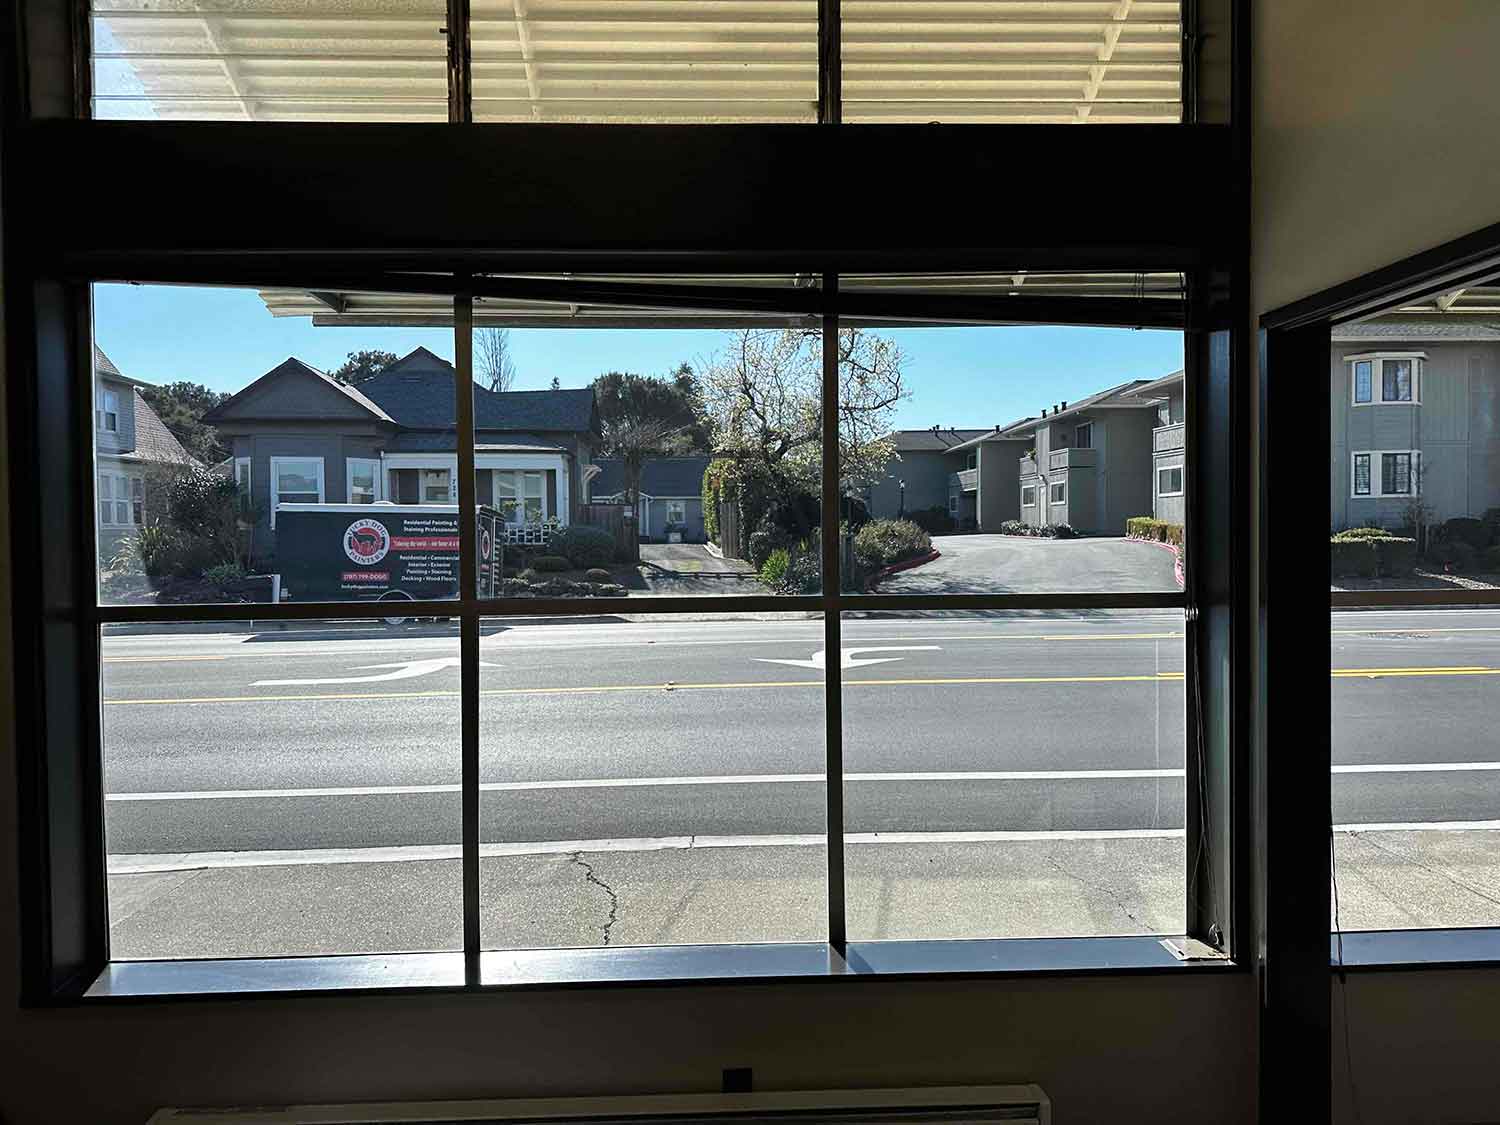  The ClimatePro team recently installed the cost-effective 3M Affinity Window Film on the windows in this office in Petaluma. 